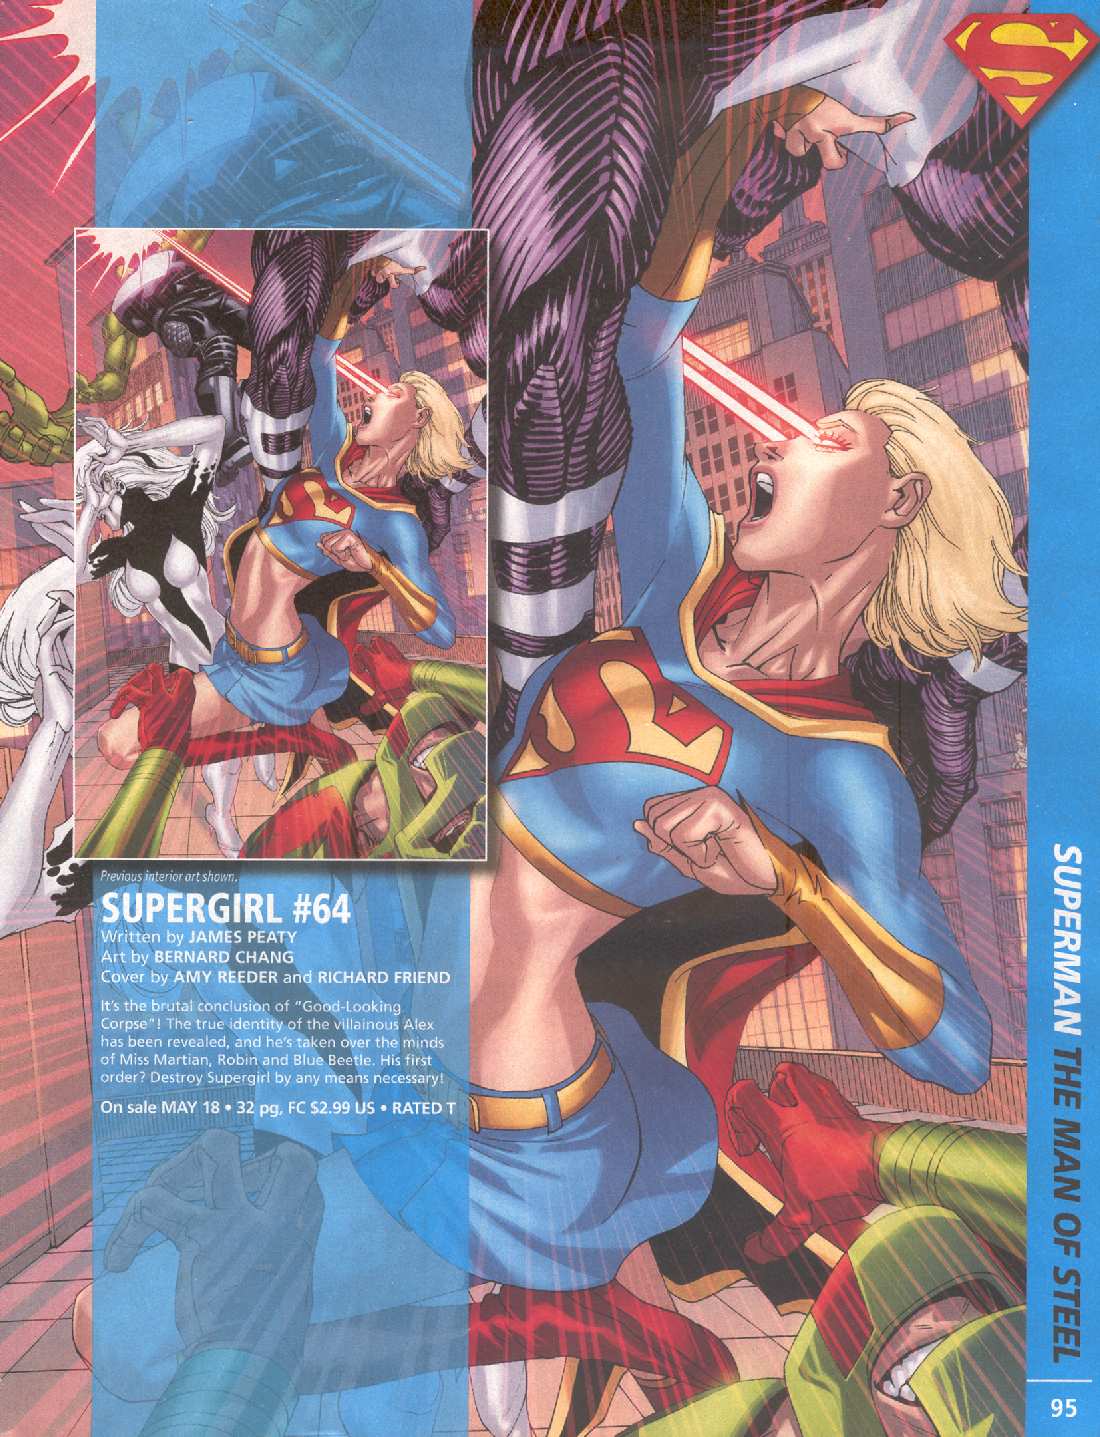 SUPERGIRL #64 PREVIEW